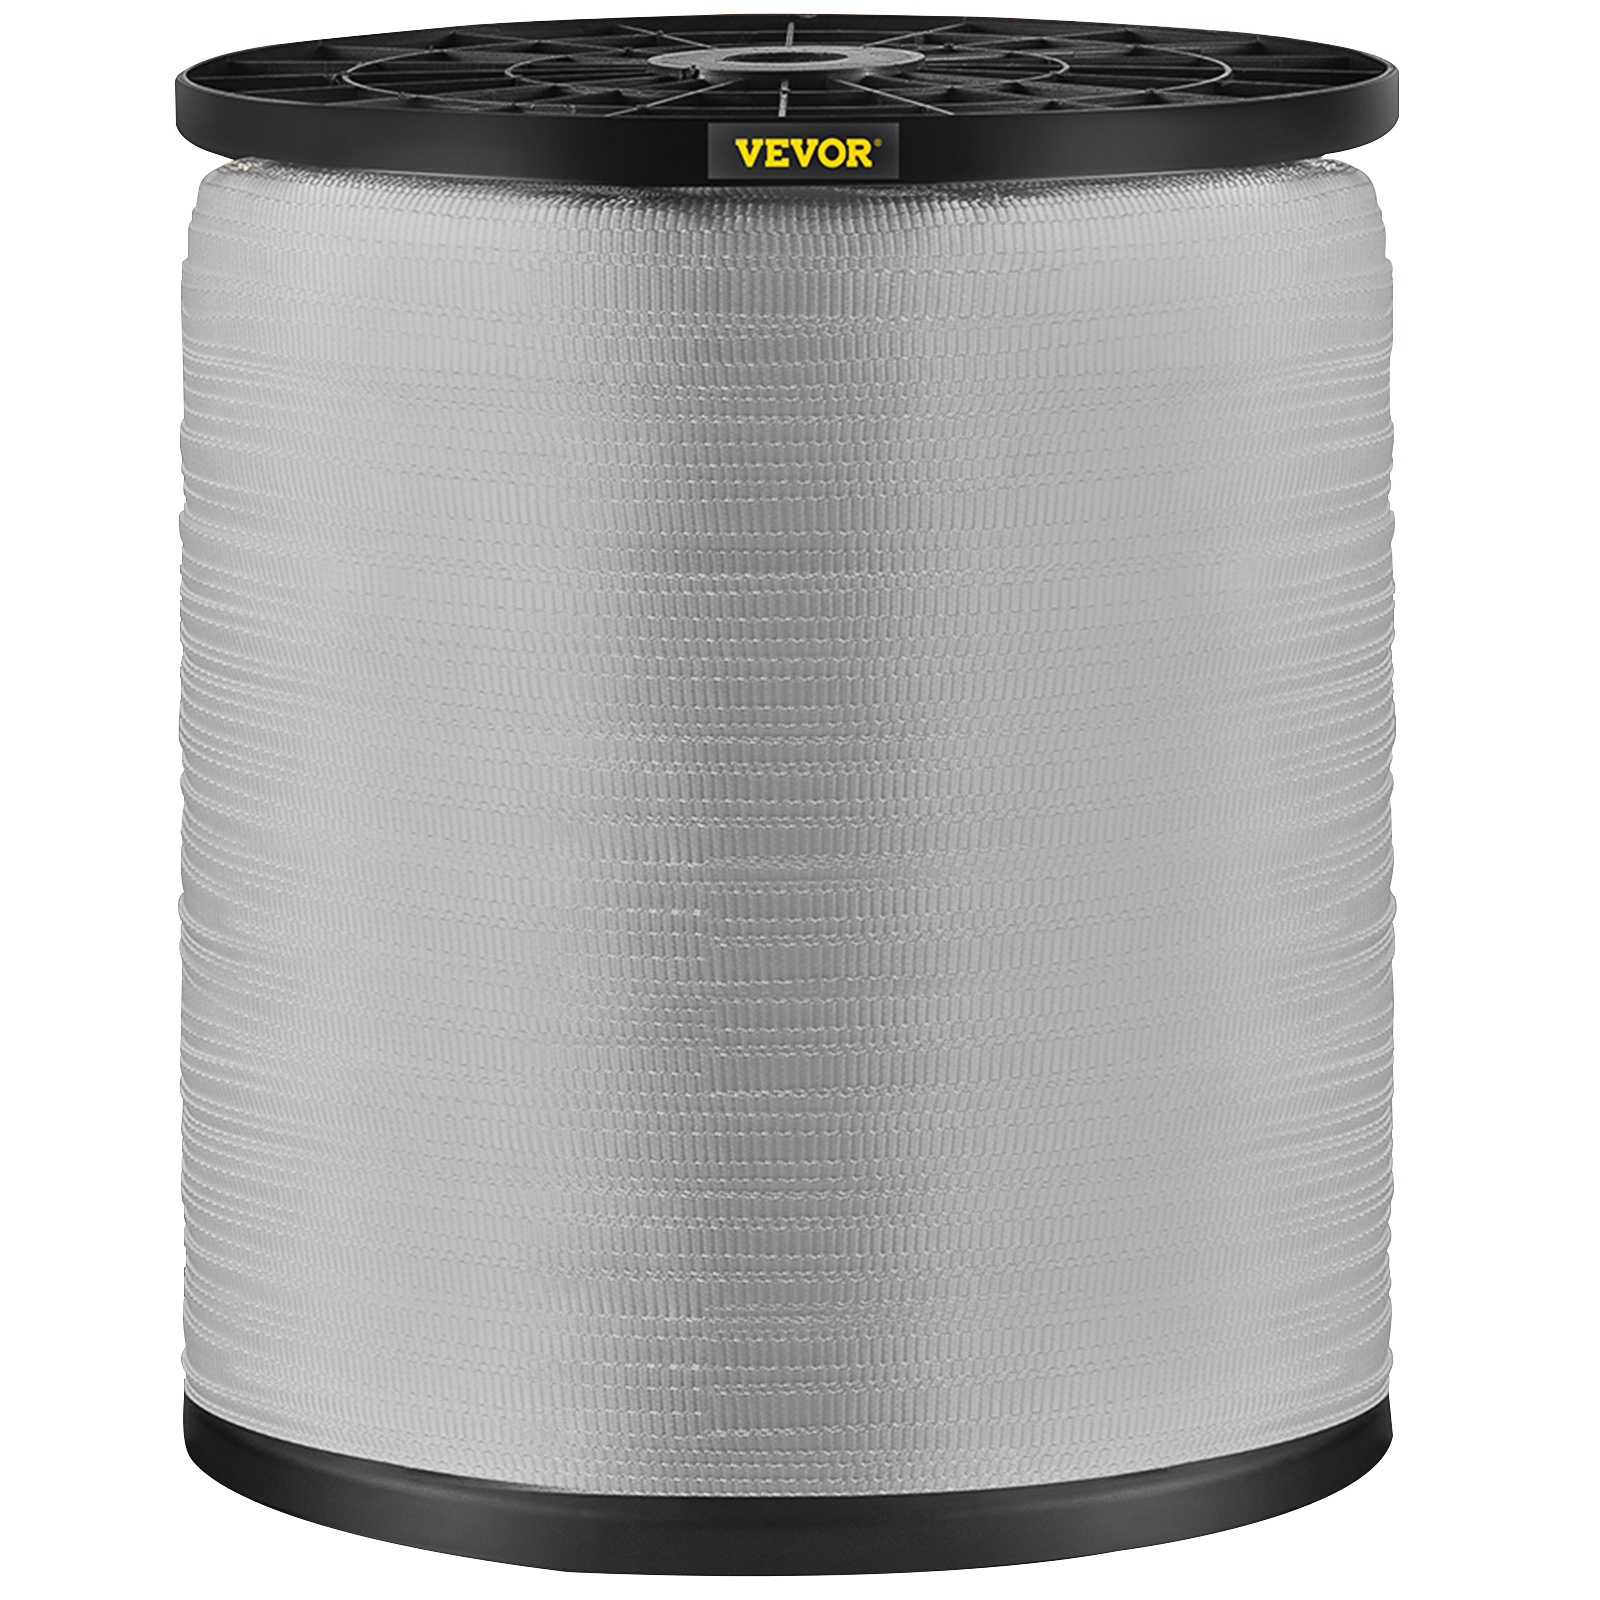 Vevor 1/2" X 5249' Polyester Pull Tape Flat Rope 1250 Lbs Tensile Capacity от Vevor Many GEOs